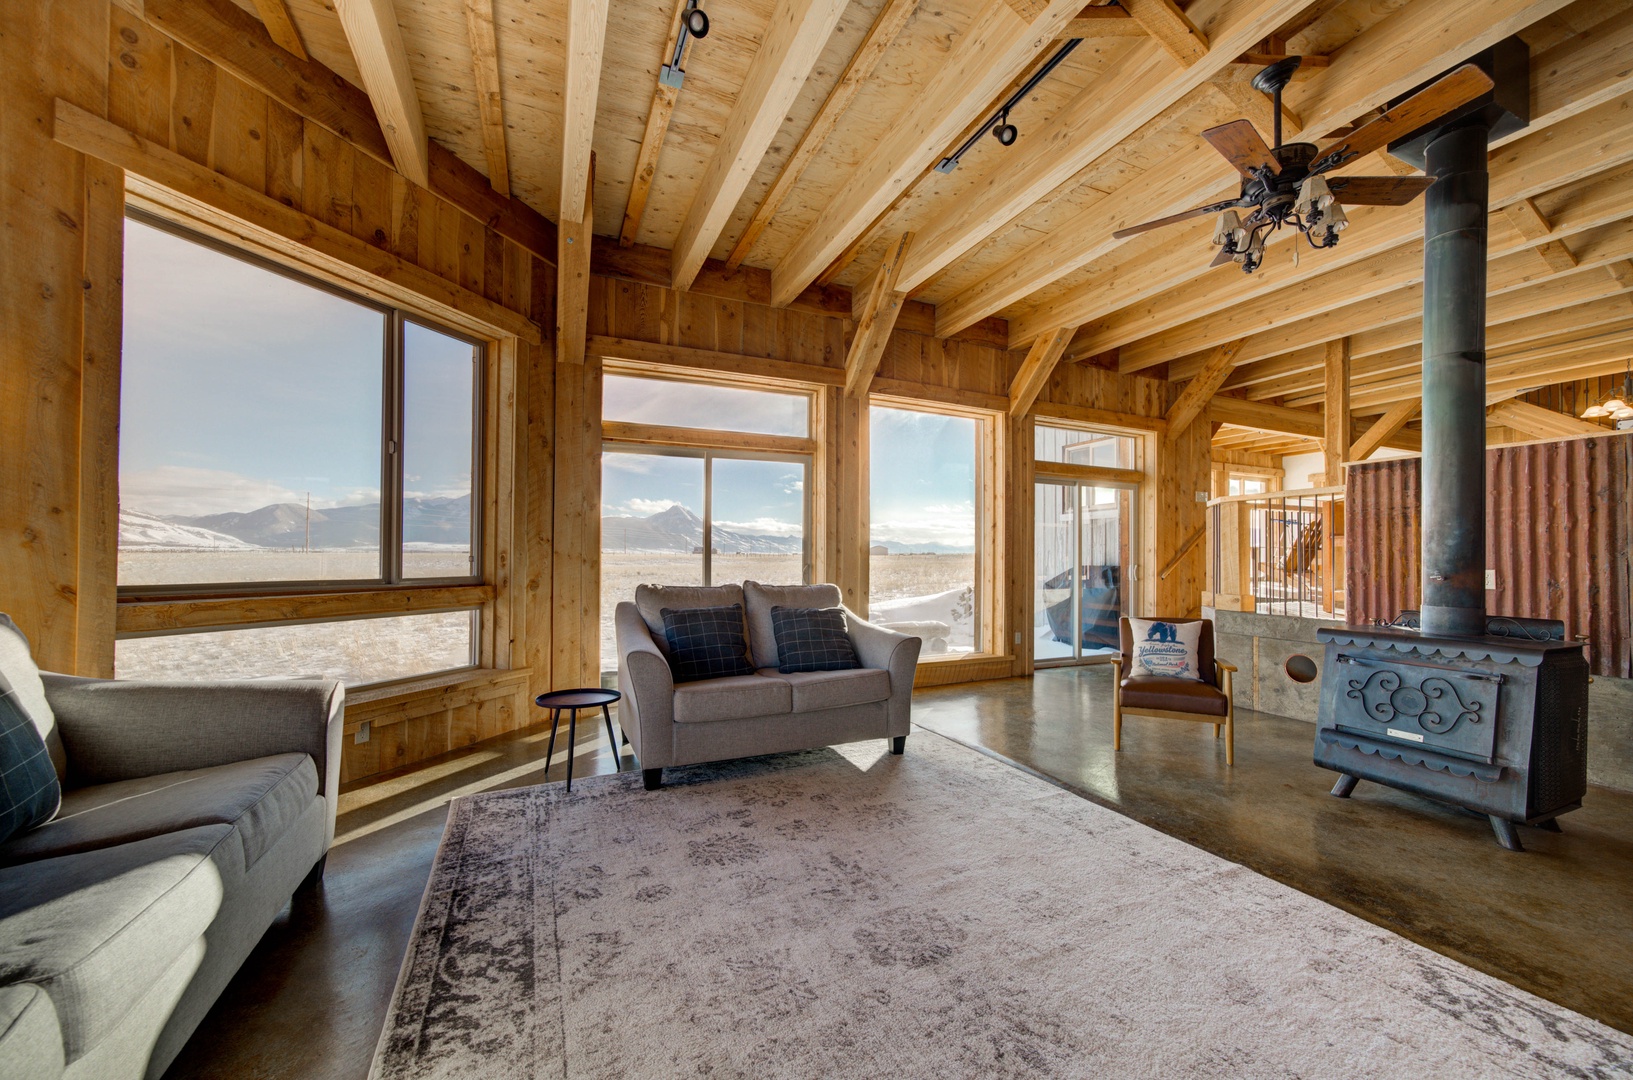 Livingston Vacation Rentals, OFB Sunset Grove - Surrounded by breathtaking mountain views, you can relax in the serenity of the house and be mesmerized by its awe-inspiring 360-degree panoramic view